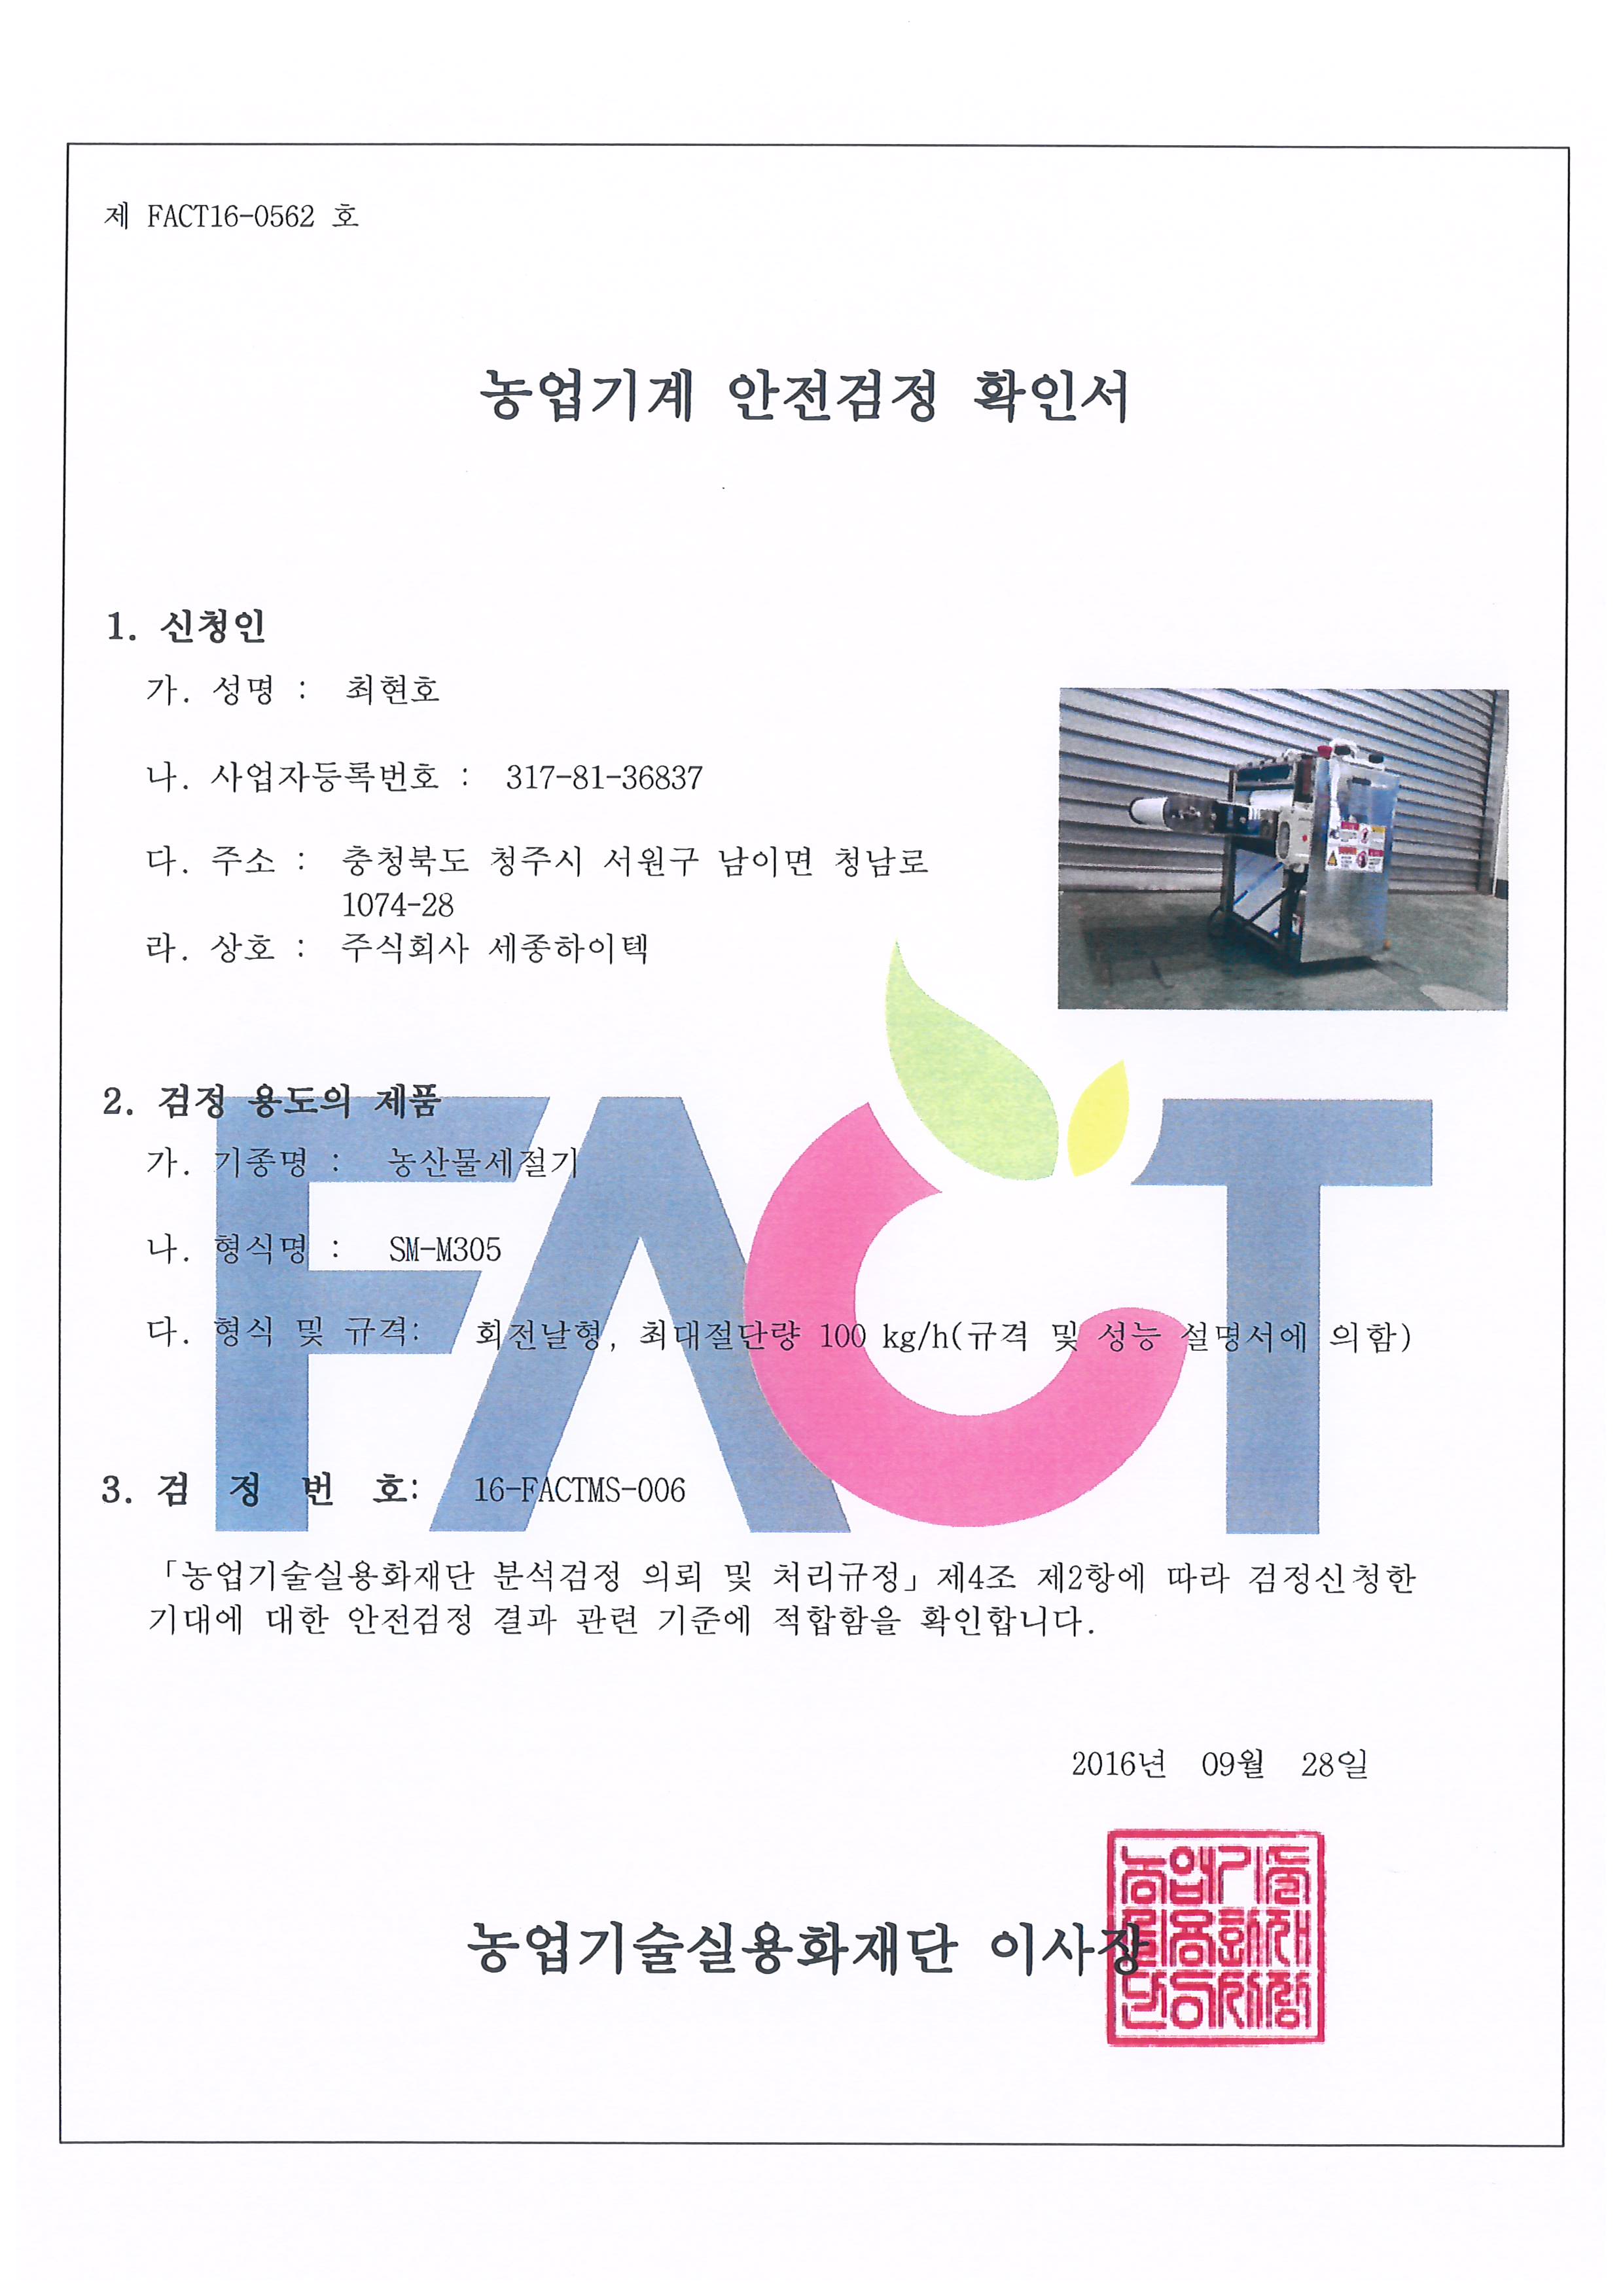 Certification-Agricultural machinery safety inspection certificate-M305